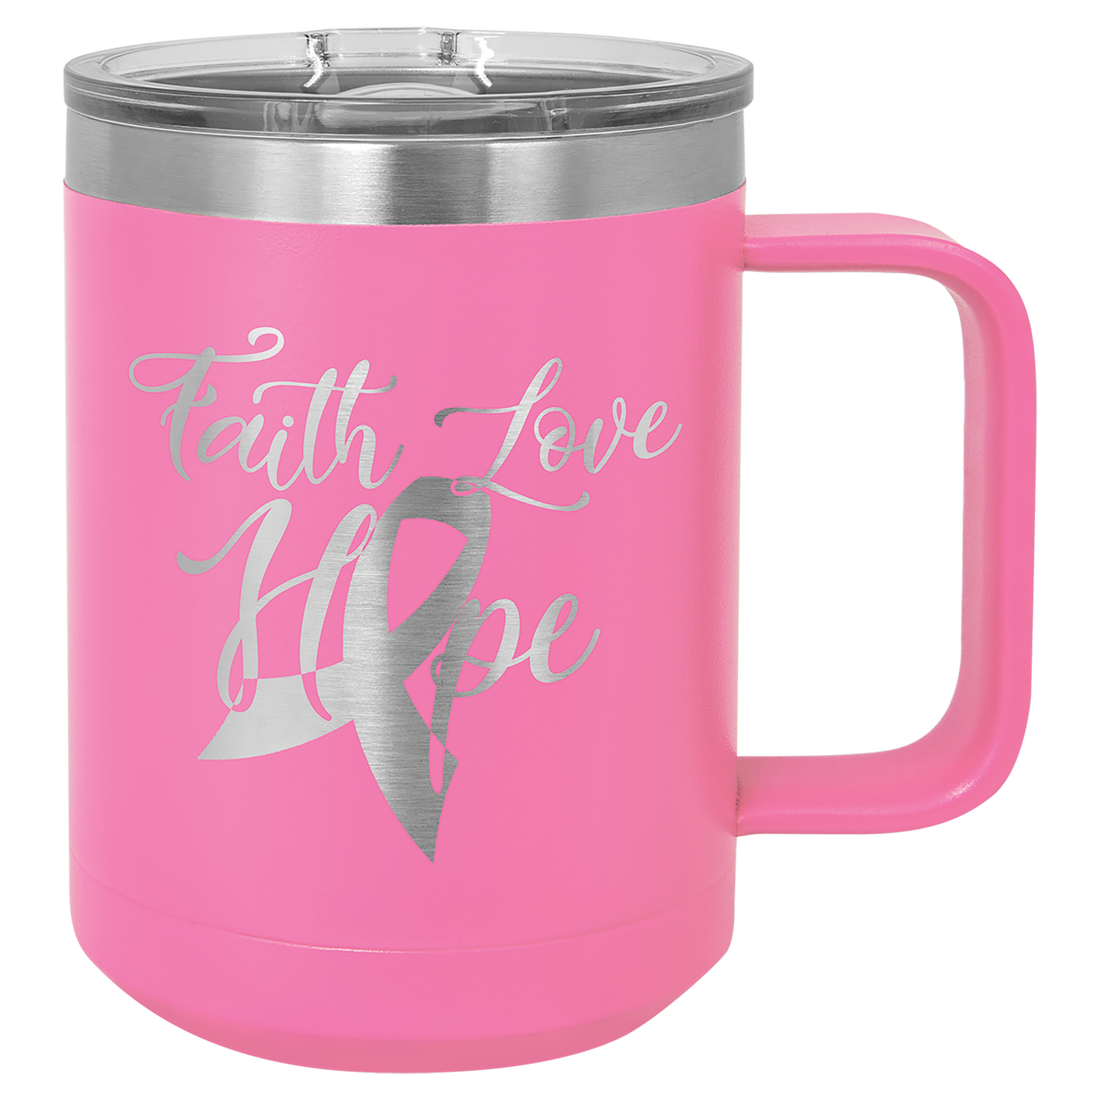 Pink  insulated travel mug with engraving.